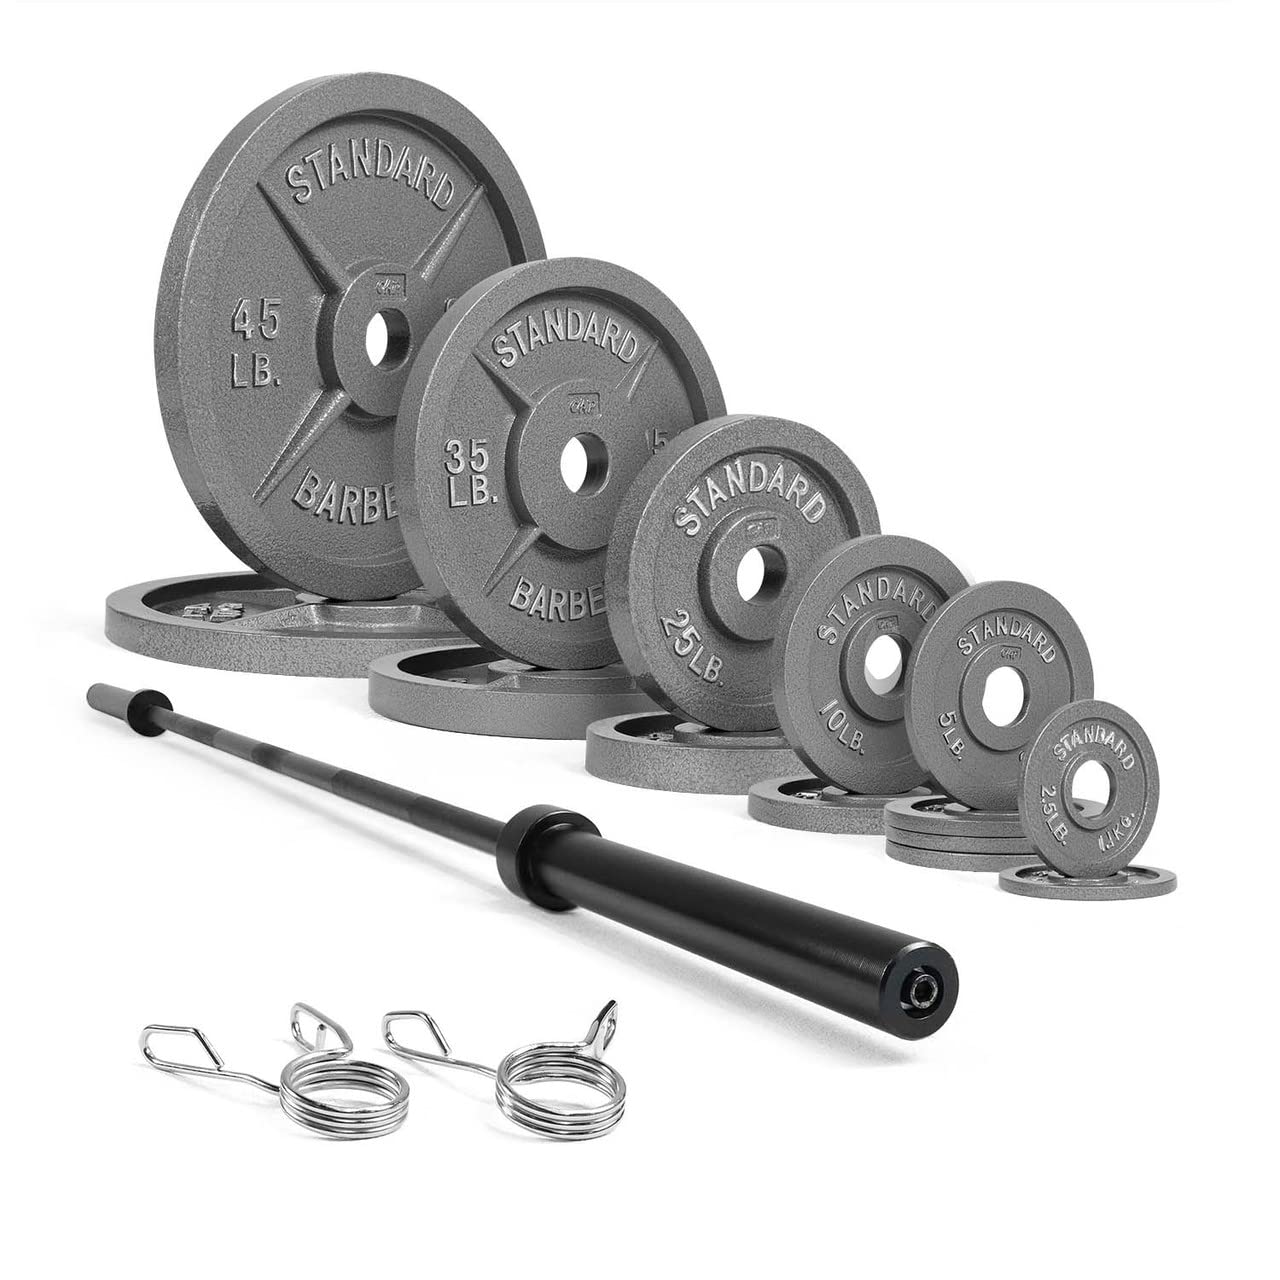 WF Athletic Supply 290lb & 300lb & 555lb Traditional/Classic Olympic Weight Plates Set with 7 ft. Olympic Barbell, Great for Strength Training, Weightlifting, Bodybuilding & Powerlifting